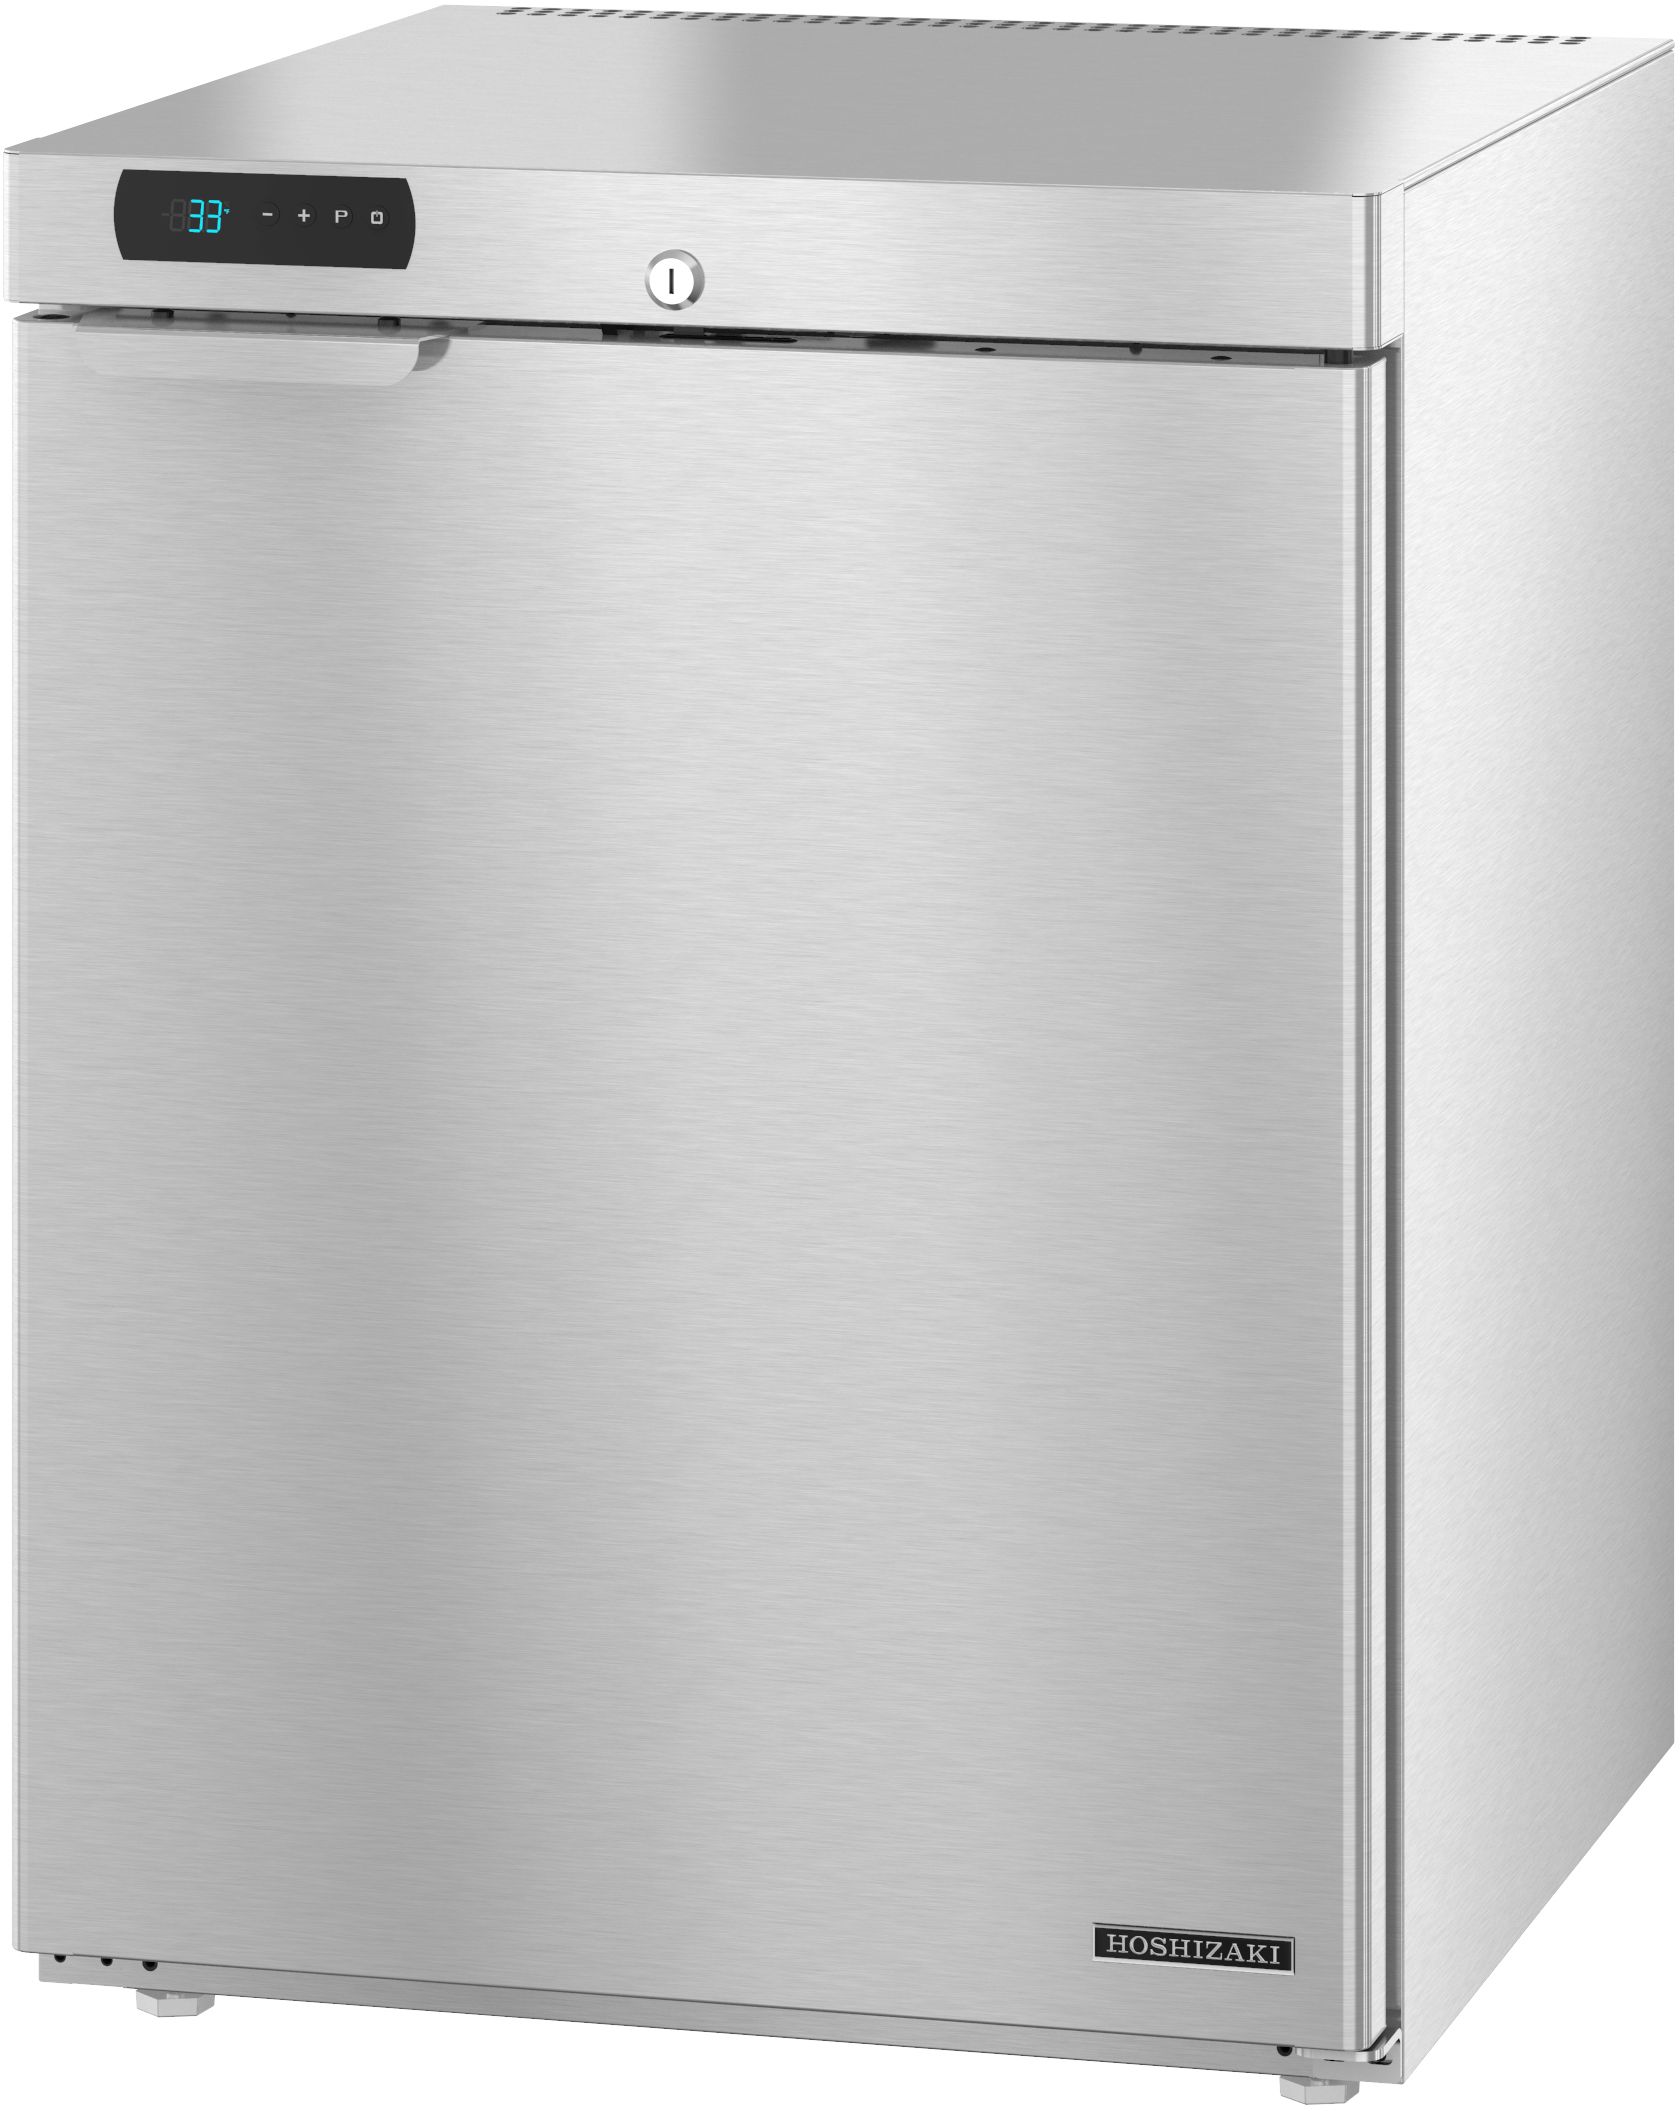 Hoshizaki 3.7 Cu. Ft. Stainless Steel Under The Counter Compact Refrigerator